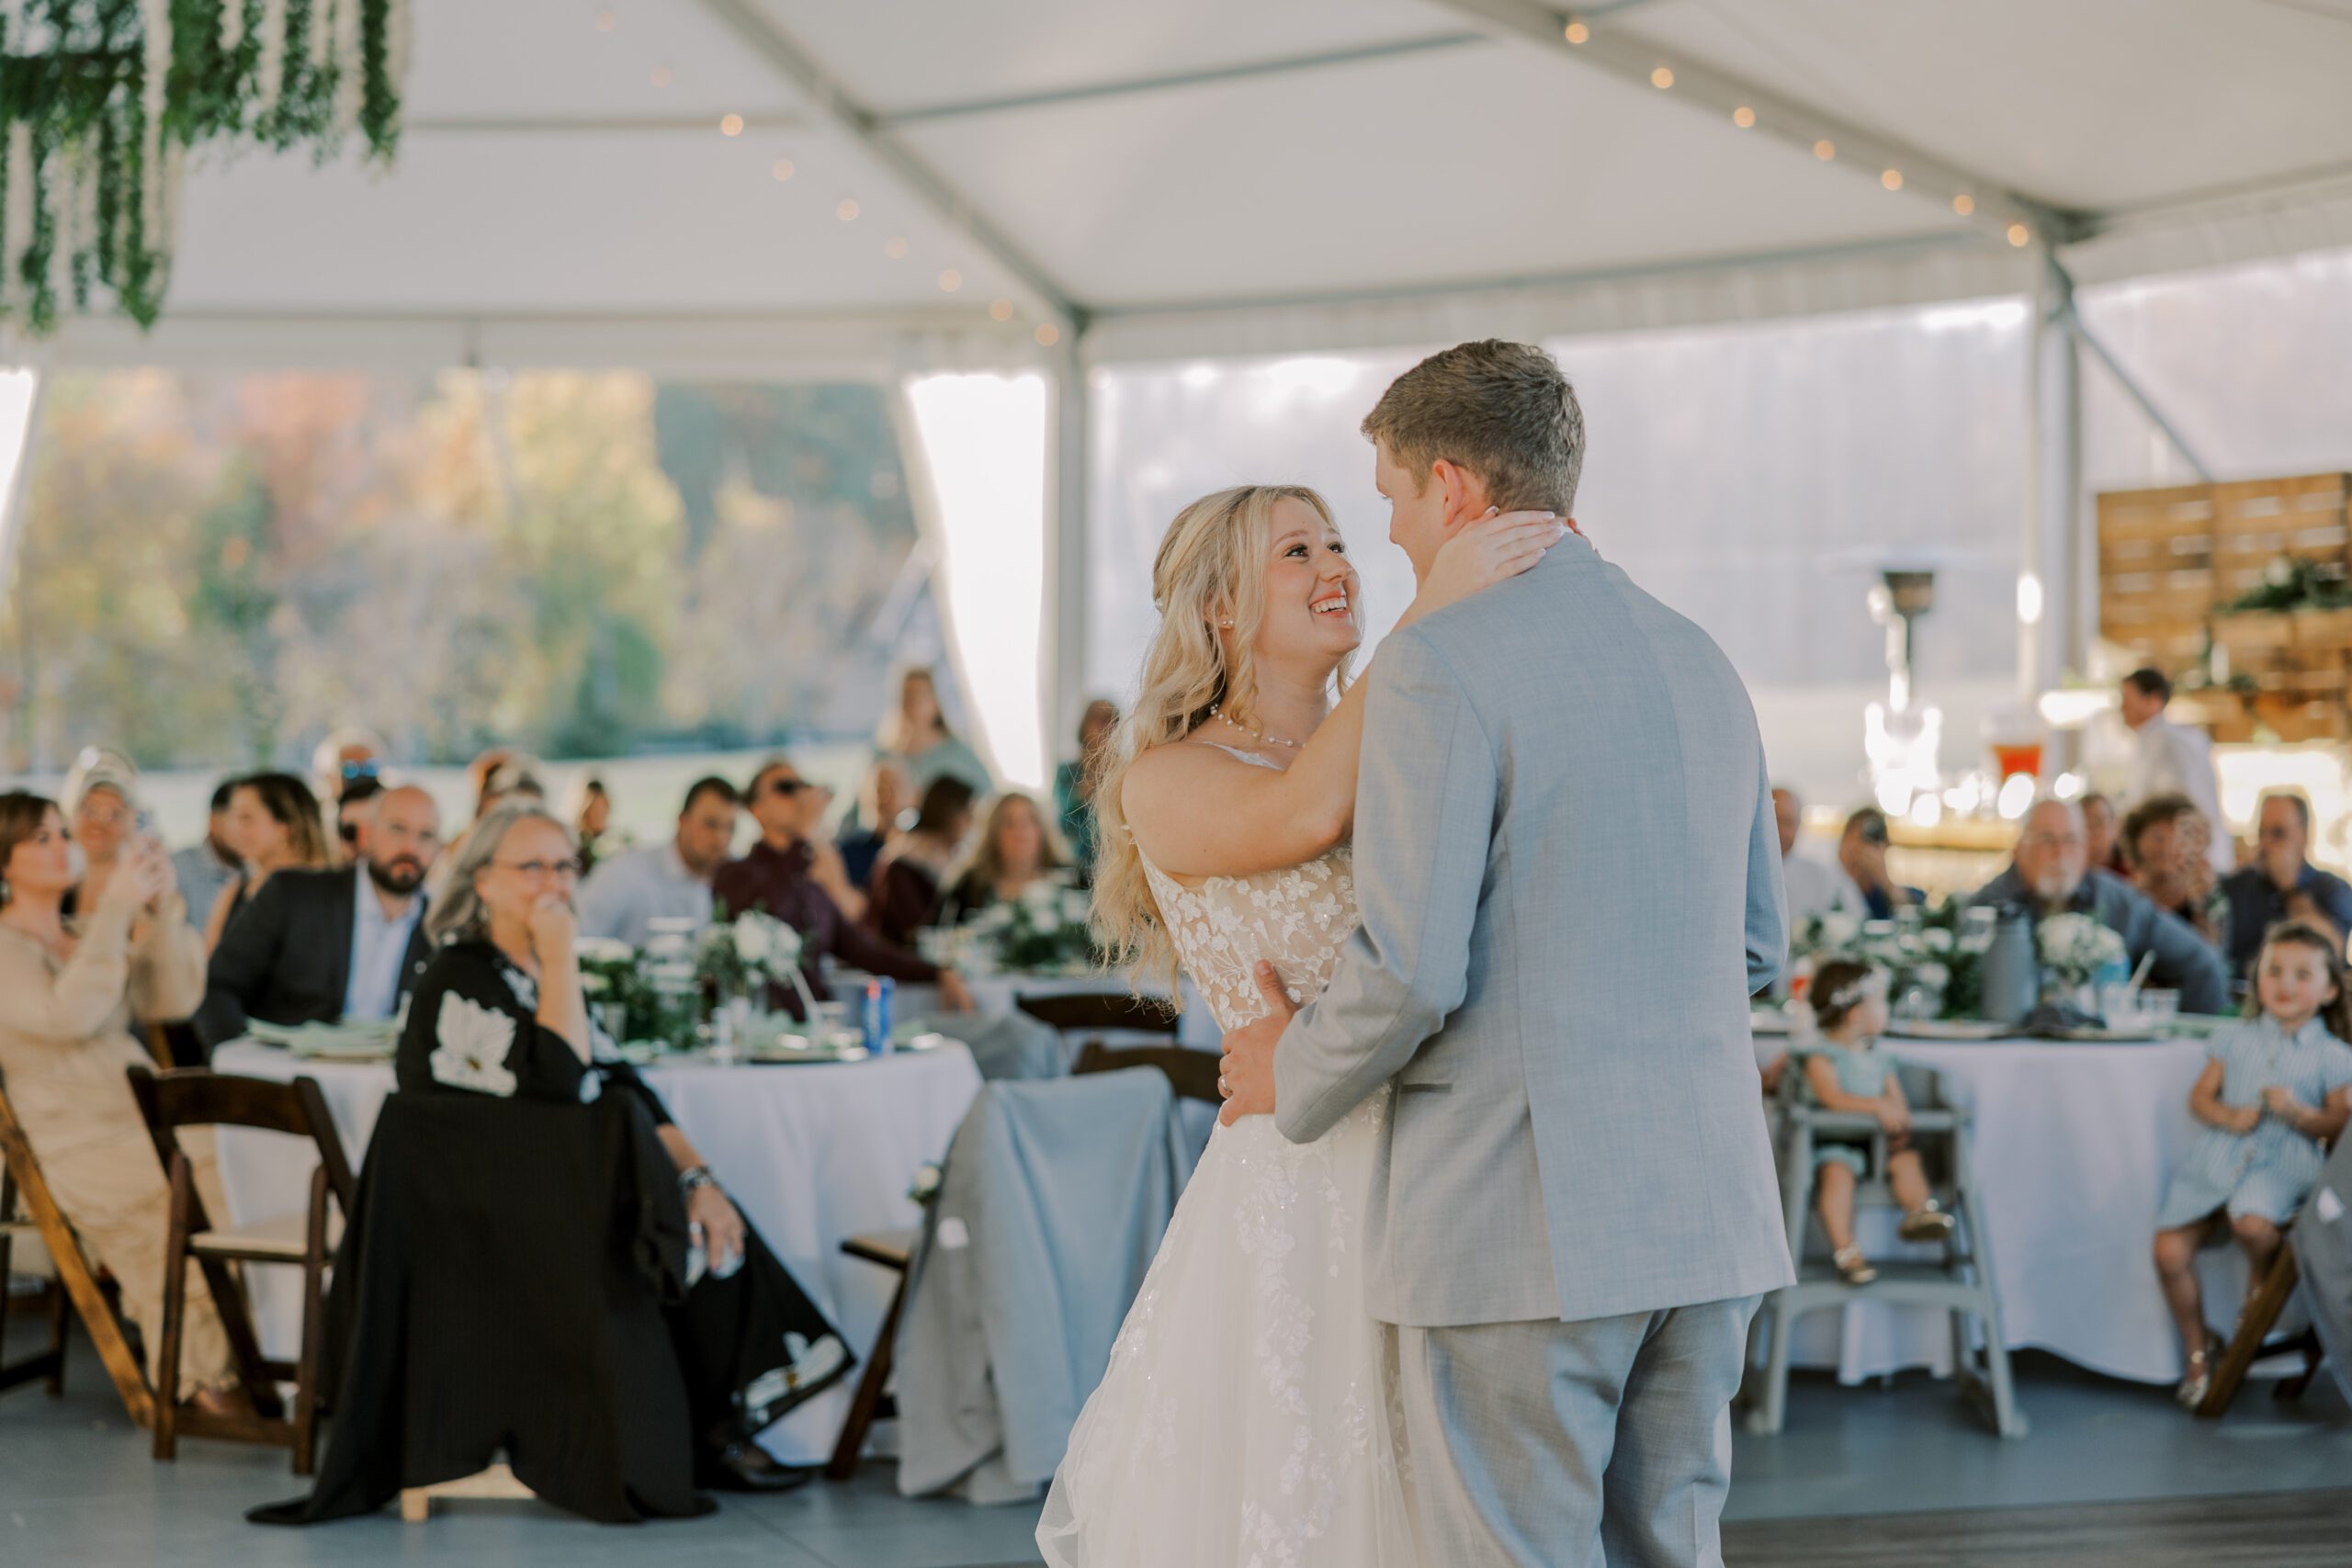 Image of bride and groom dancing at their reception at arbor haven, looking at each other, with guest sitting at tables behind them